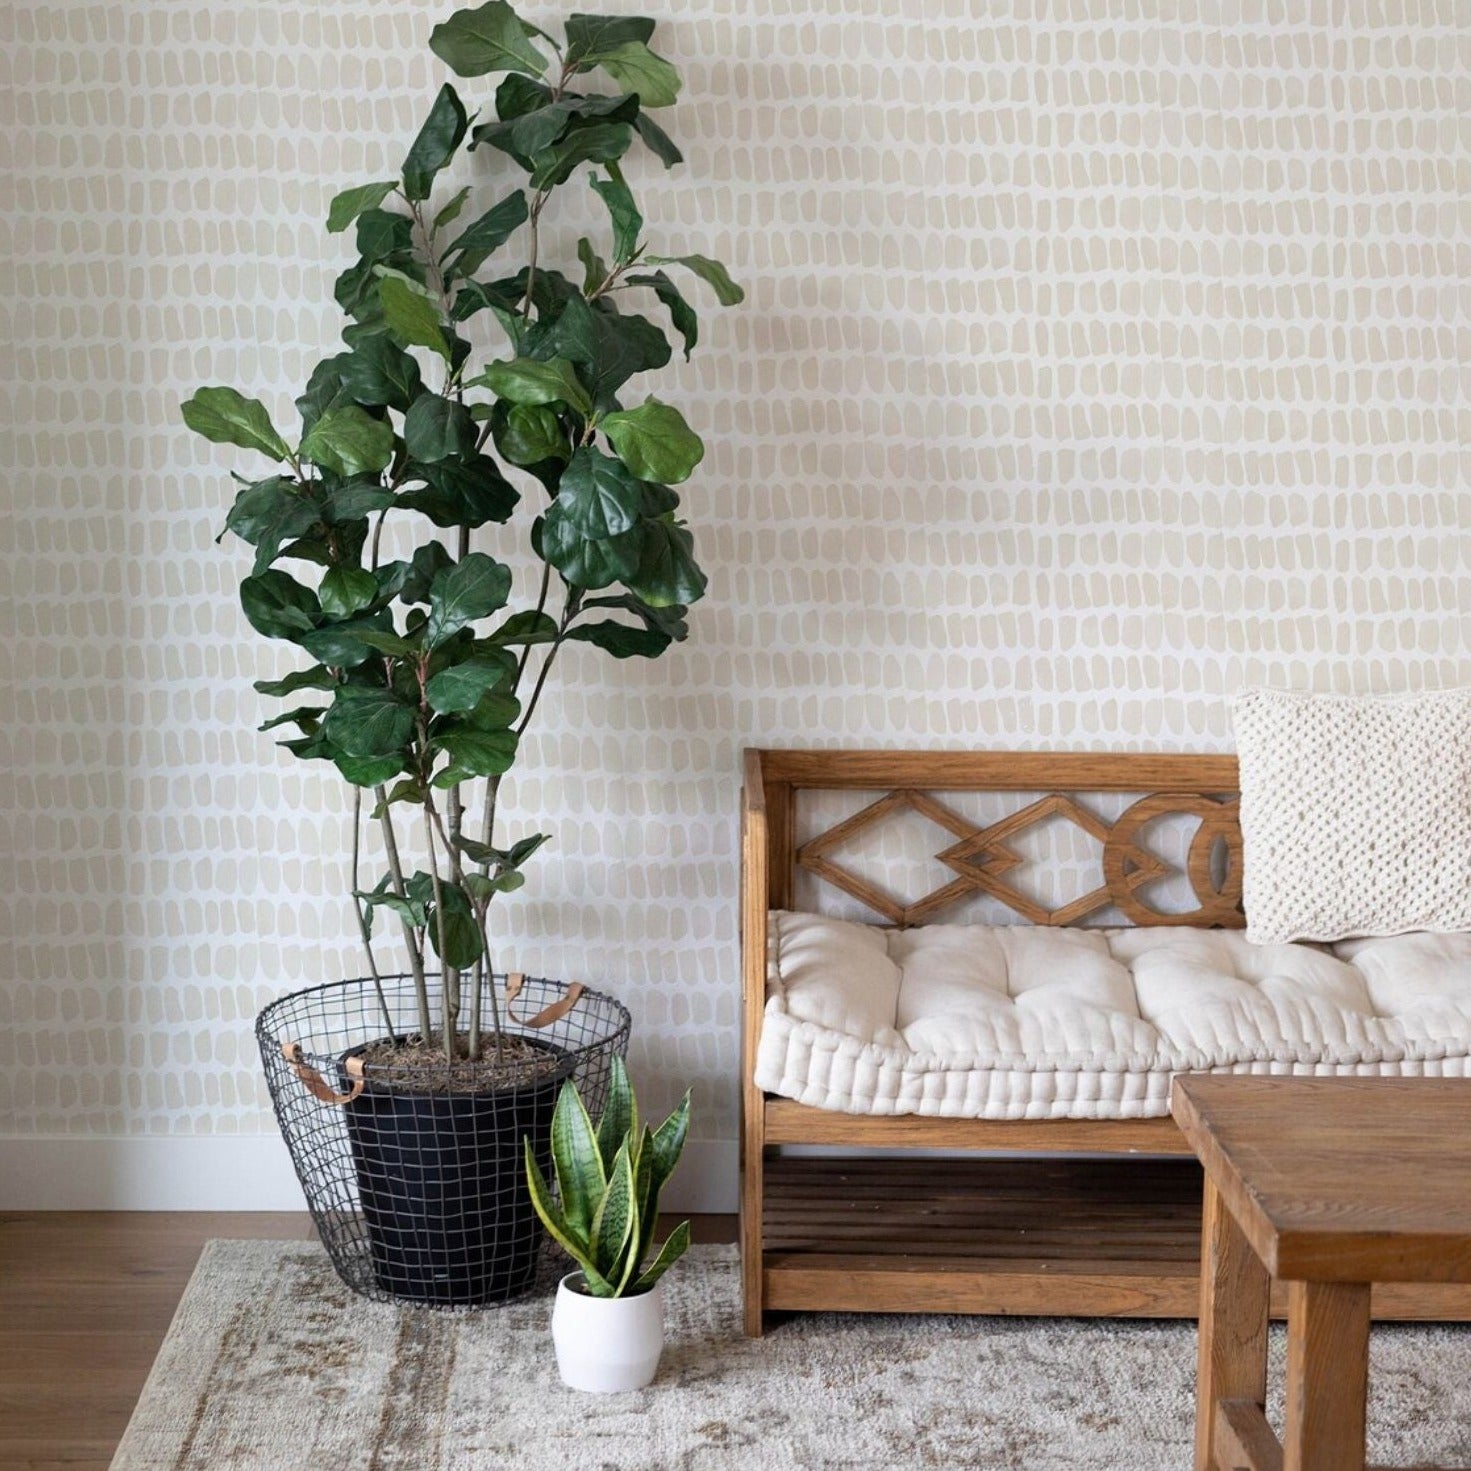 An interior setting where the Ecru Watercolour Dots Wallpaper is used to decorate a cozy corner. The wallpaper's subtle design complements the natural wooden furniture and the greenery of indoor plants, creating a relaxed and organic ambiance in the room. The image shows how the wallpaper can enhance a living space without overwhelming it.